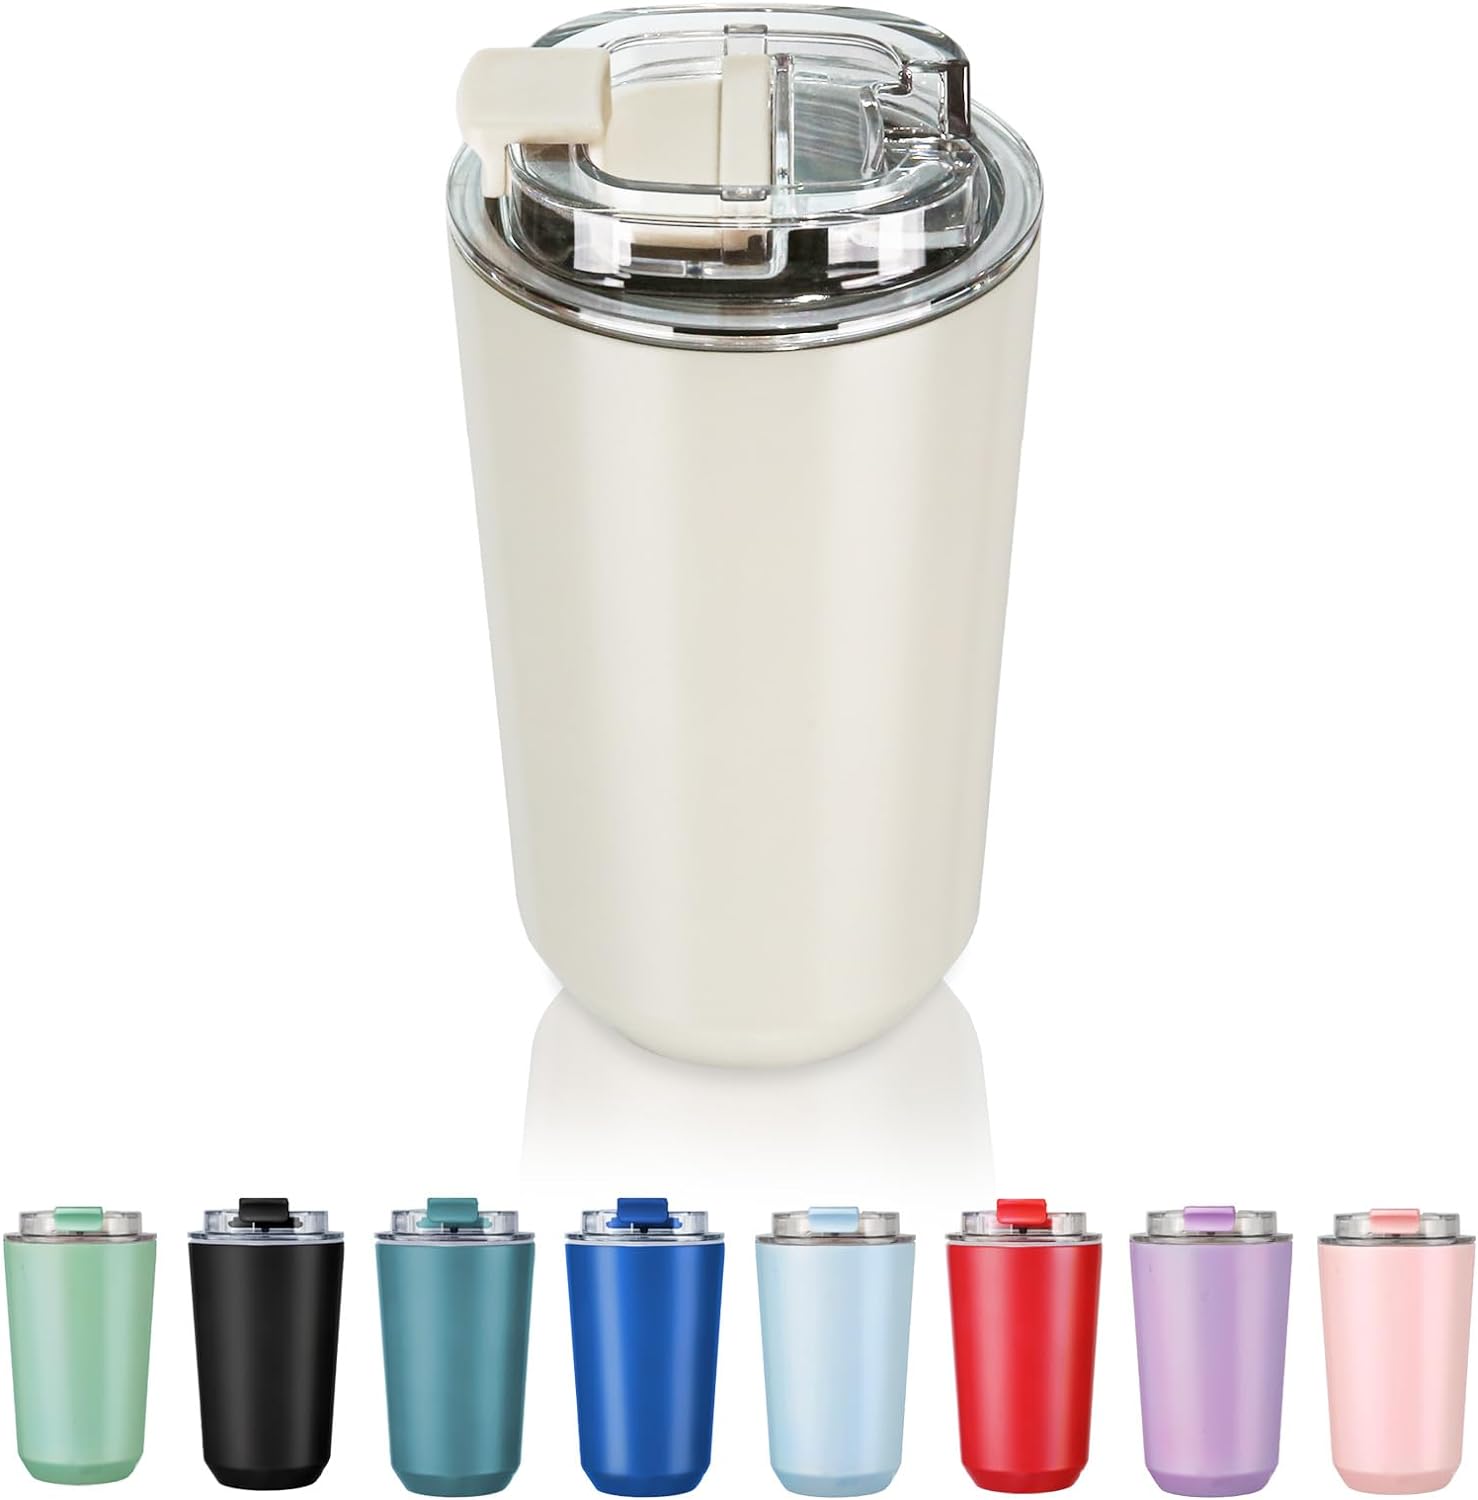 Love the colors got blue and pink. Keeps my coffee and Coco nice and hot. Just the right size. Not hot on outside so comfortable to hold. Lid is screw on so stays tight and no drip. Highly recommend